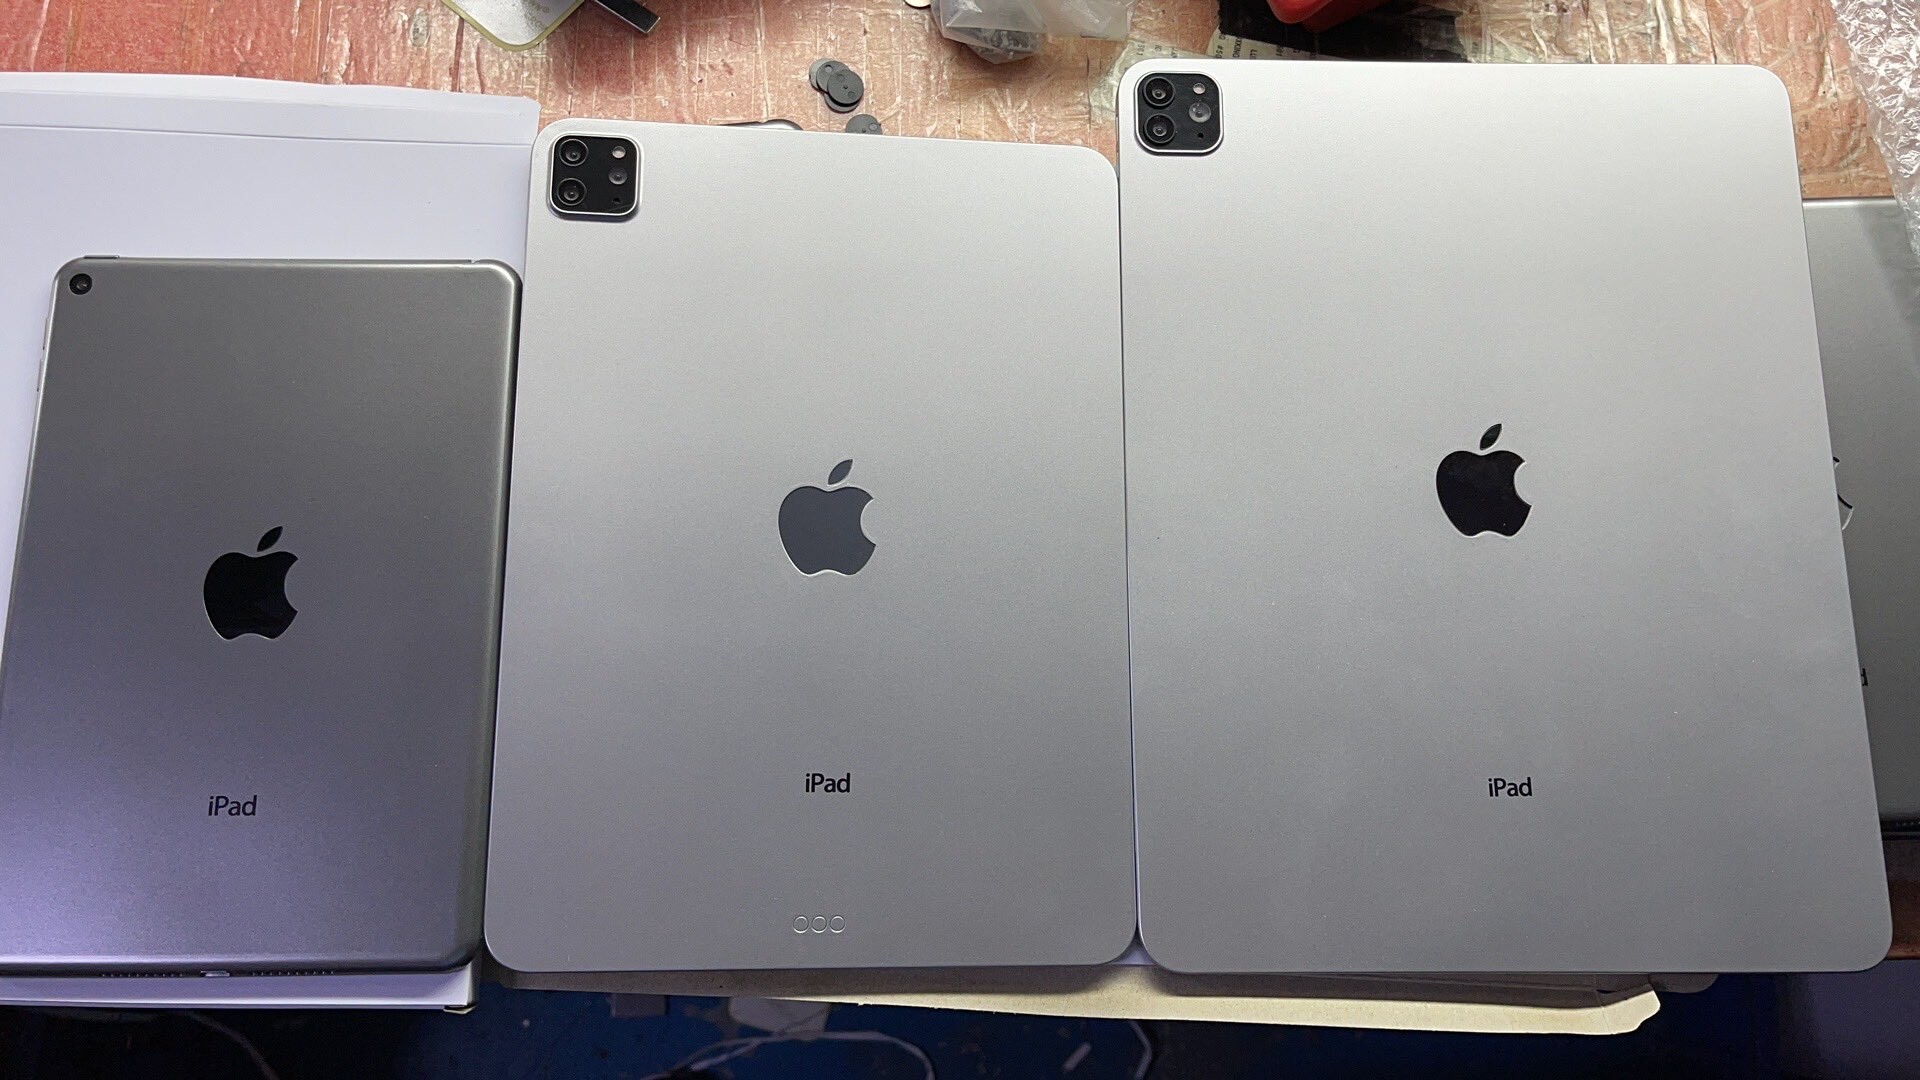 The leaked photos show the supposed designs of the next generation Apple iPad iPad and iPad mini tablets